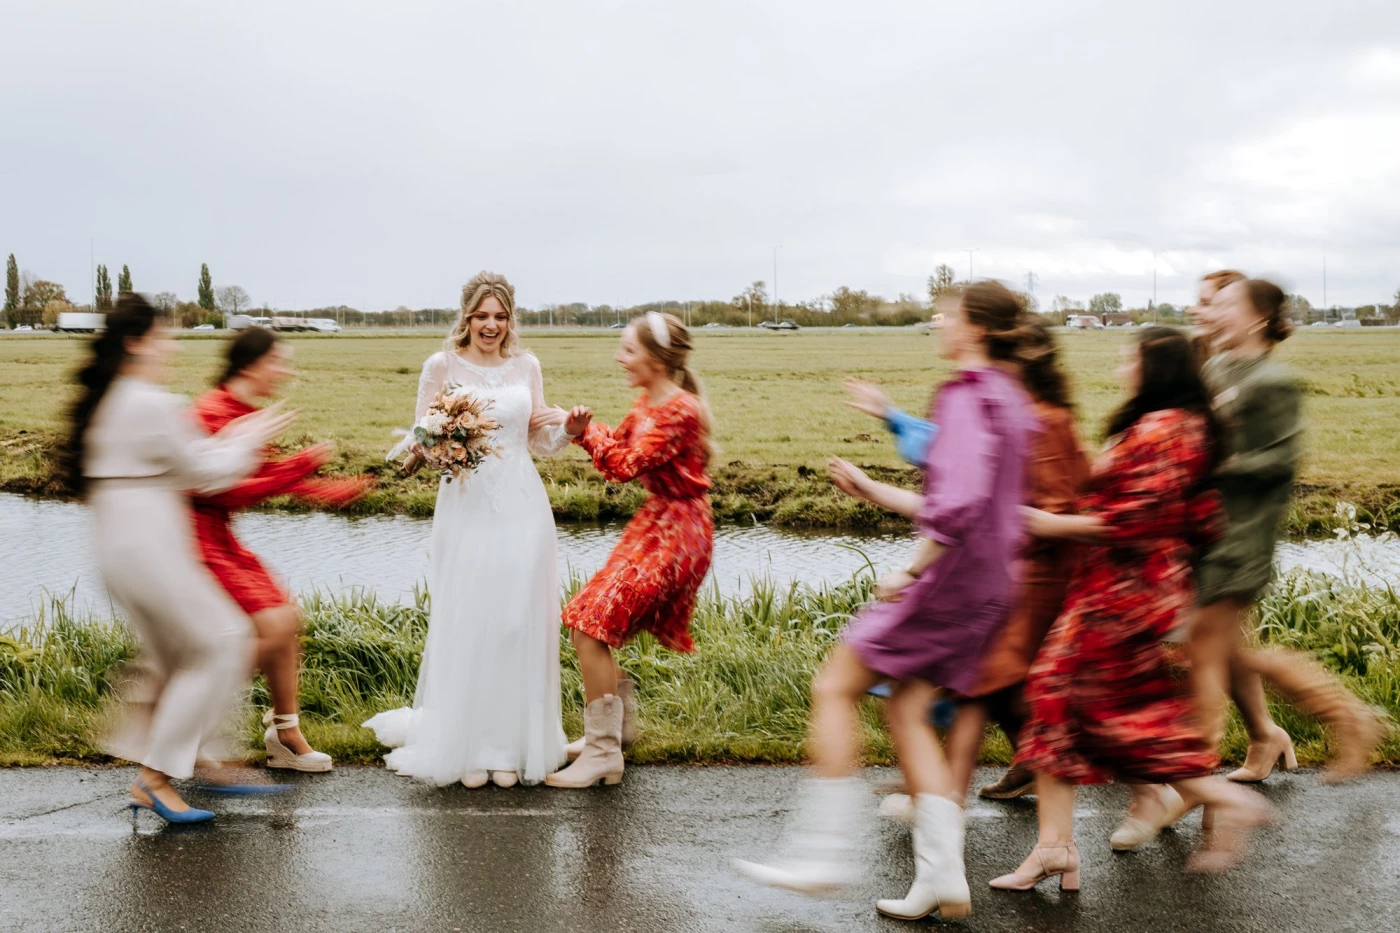 When it was time to make some photos of the bride with her friends, the rain had just stopped, so we...